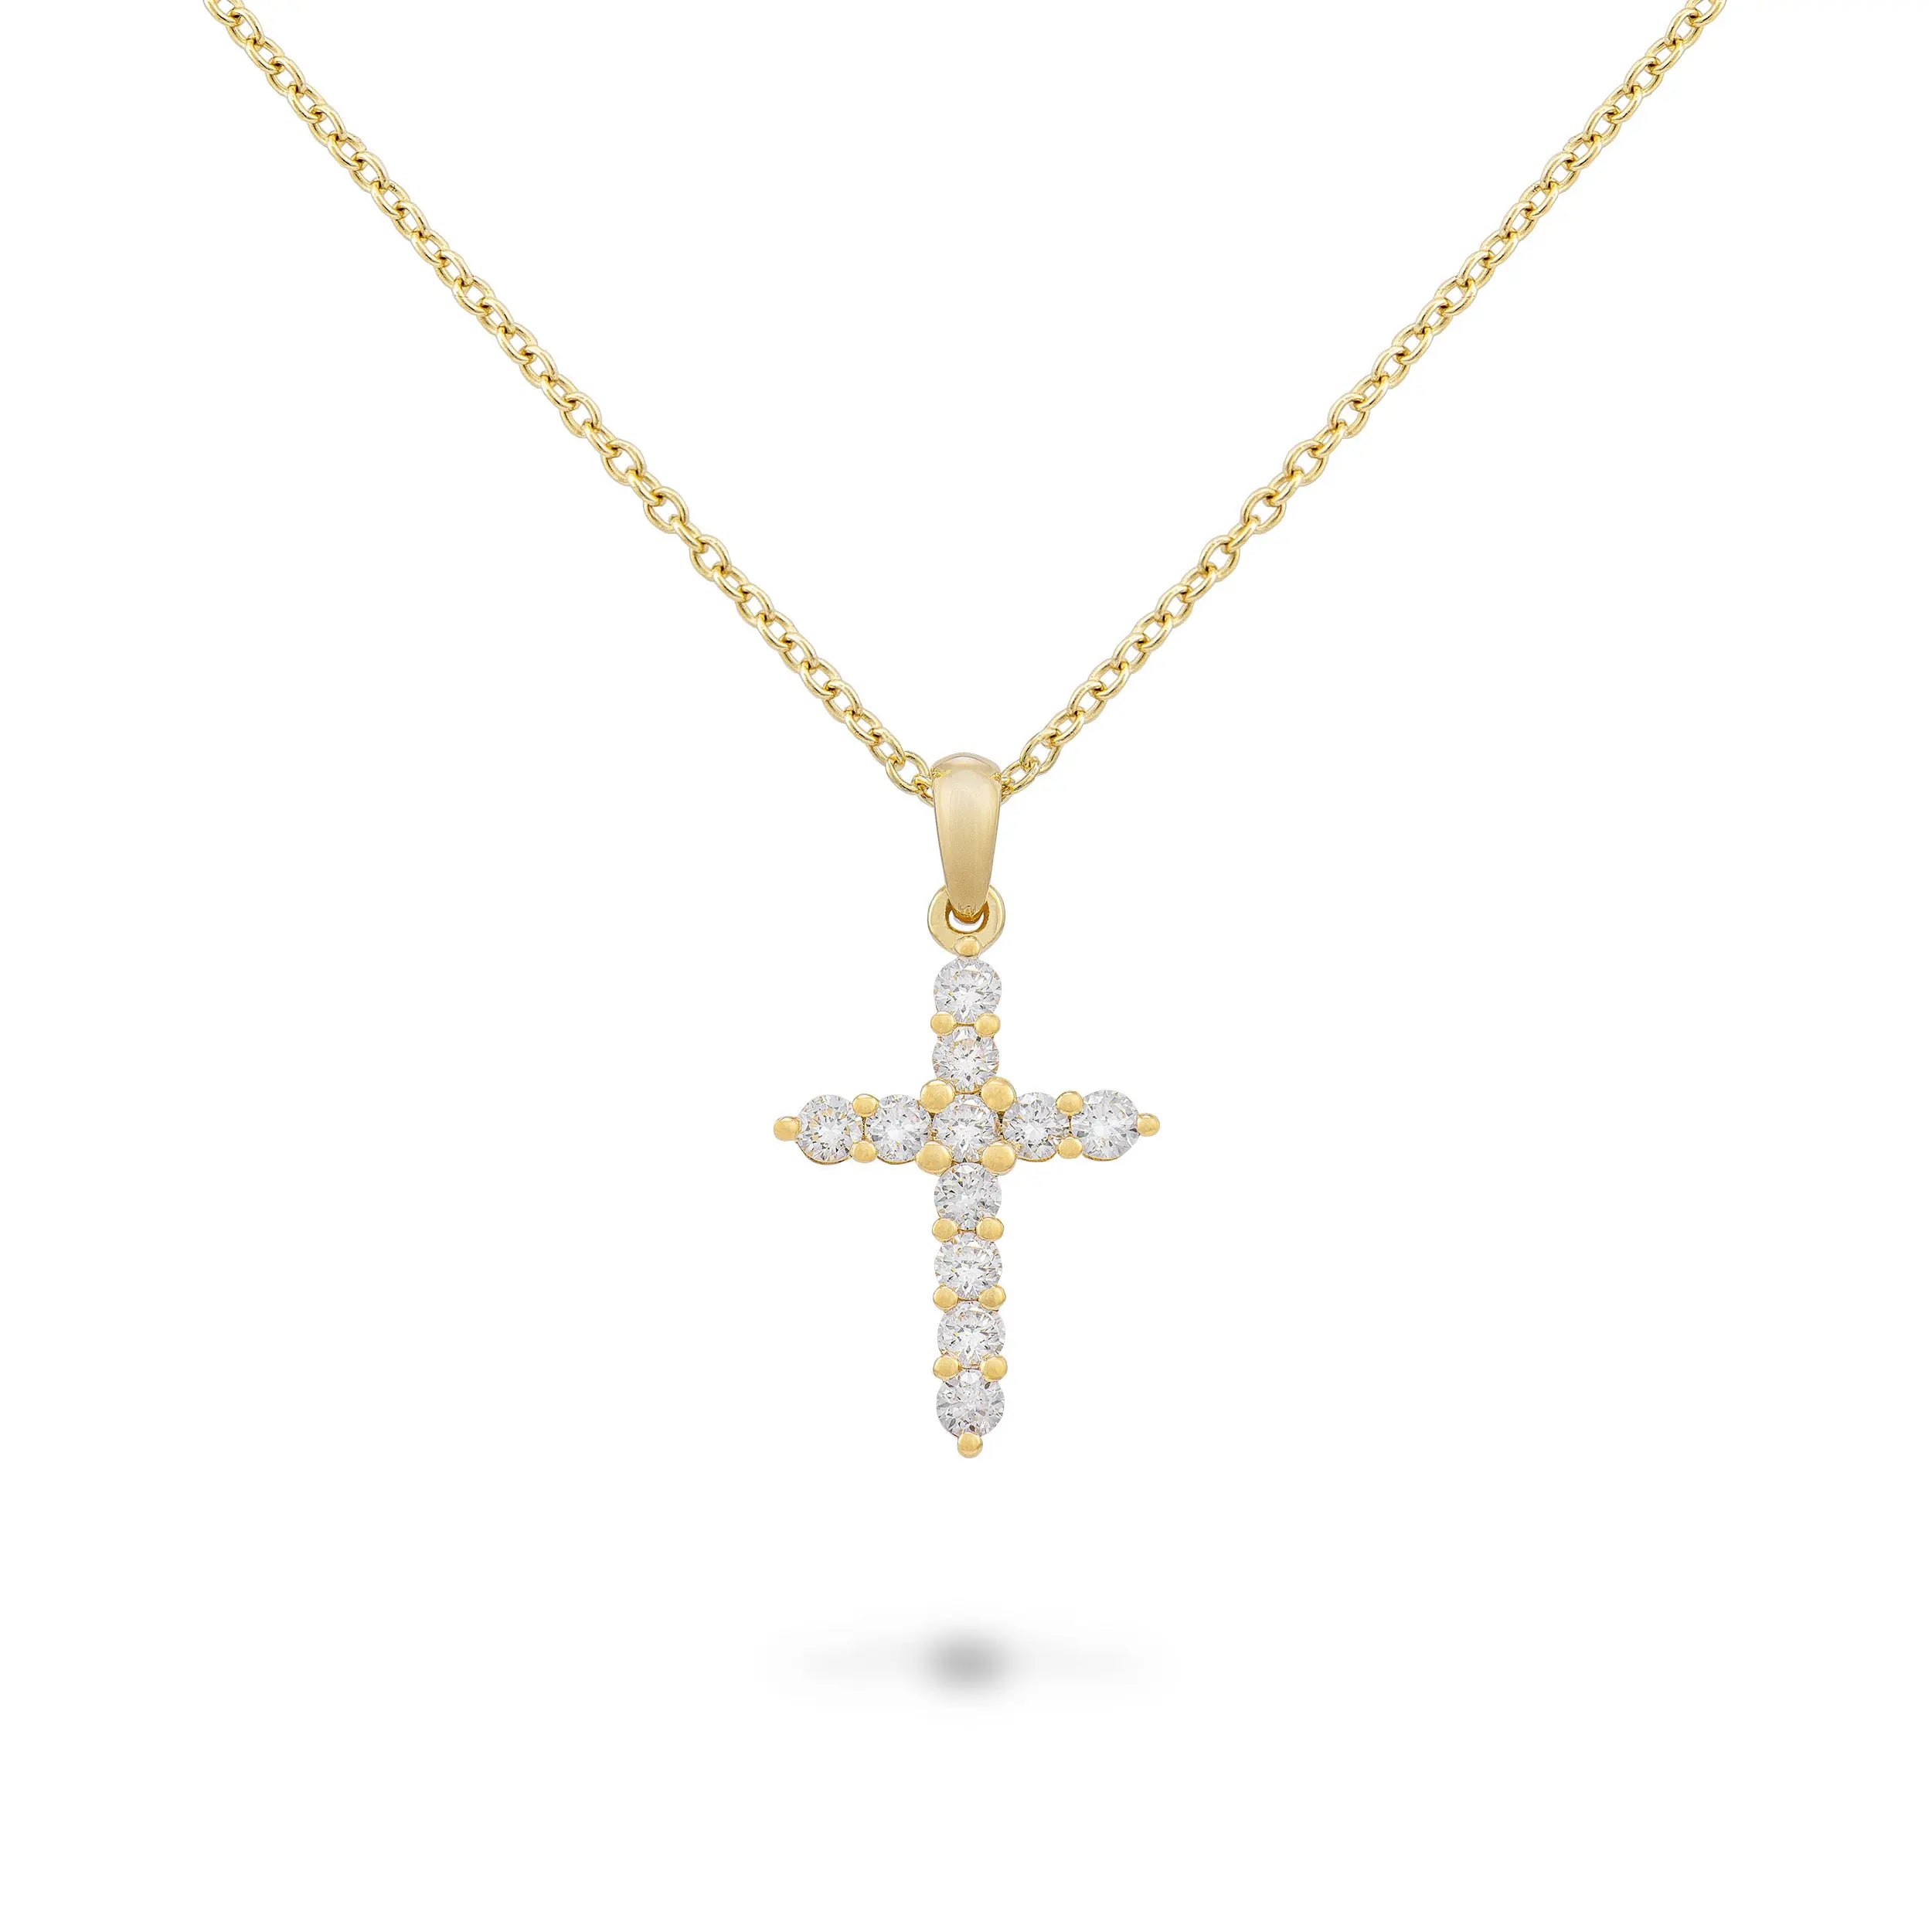 Classic and timeless icon of jewellery, with the combinations of gold and diamonds declined in several versions.   18k yellow gold with diamond .37 cttw pave cross necklace and chain.   Chain Length: 18 inches with a jump ring at 16 inches  Designed by Piero Milano